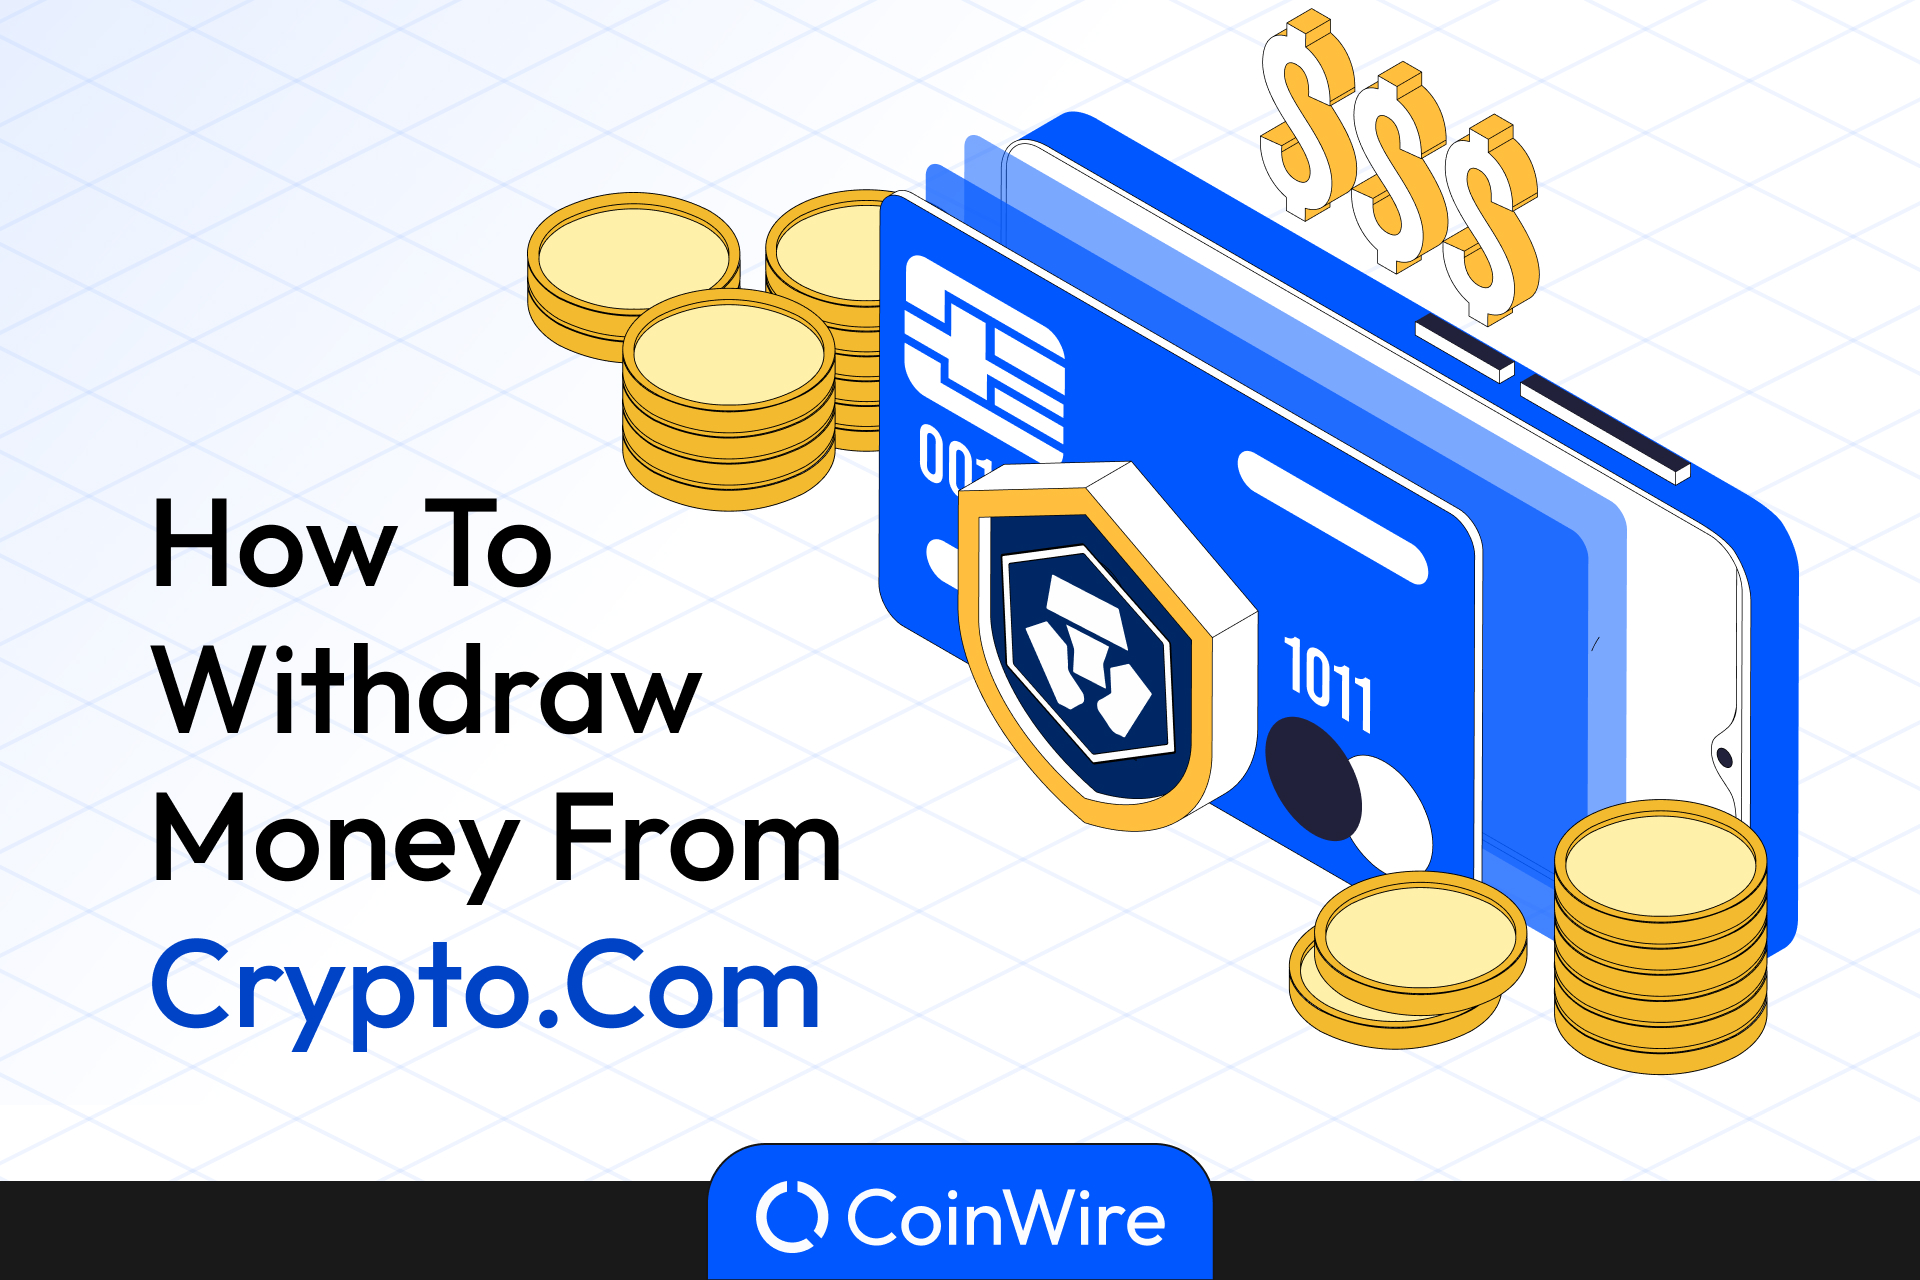 How To Withdraw Money From Crypto.com